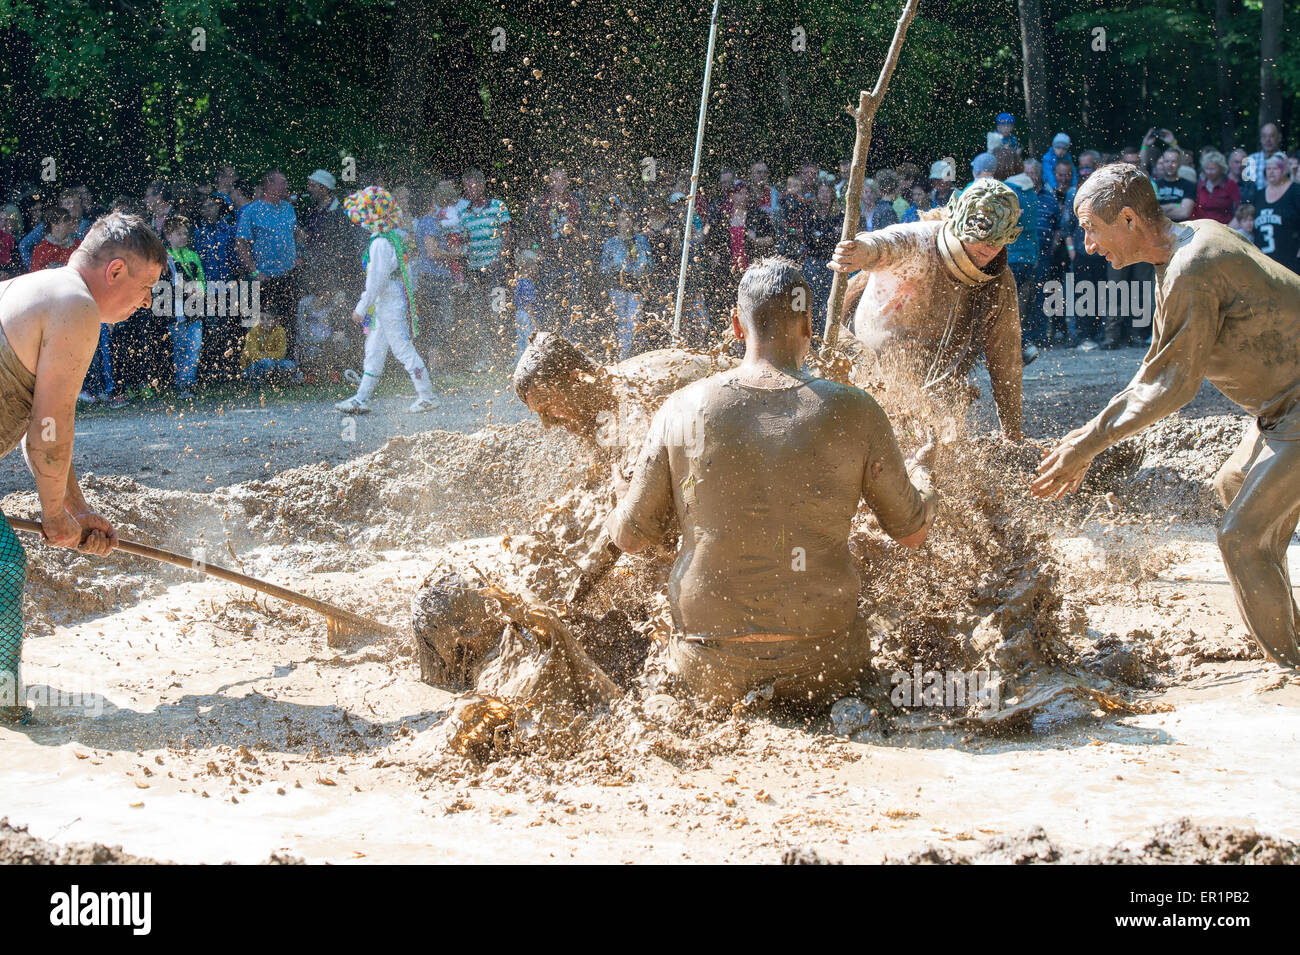 Hergisdorf, Germany. 25th May, 2015. Participants of the traditional dirty pig festival wallow in a slough near Hergisdorf, Germany, 25 May 2015. With this custom the villagers want to dispel winter. The 'dirty pigs' who represent the winter jump into sloughs again and again. Runners dressed in white representing the summer expel them from the sloughs with long whips. When the last 'dirty pig' is expelled from the sloughs the summer prevails over winter. Photo: PETER ENDIG/dpa/Alamy Live News Stock Photo